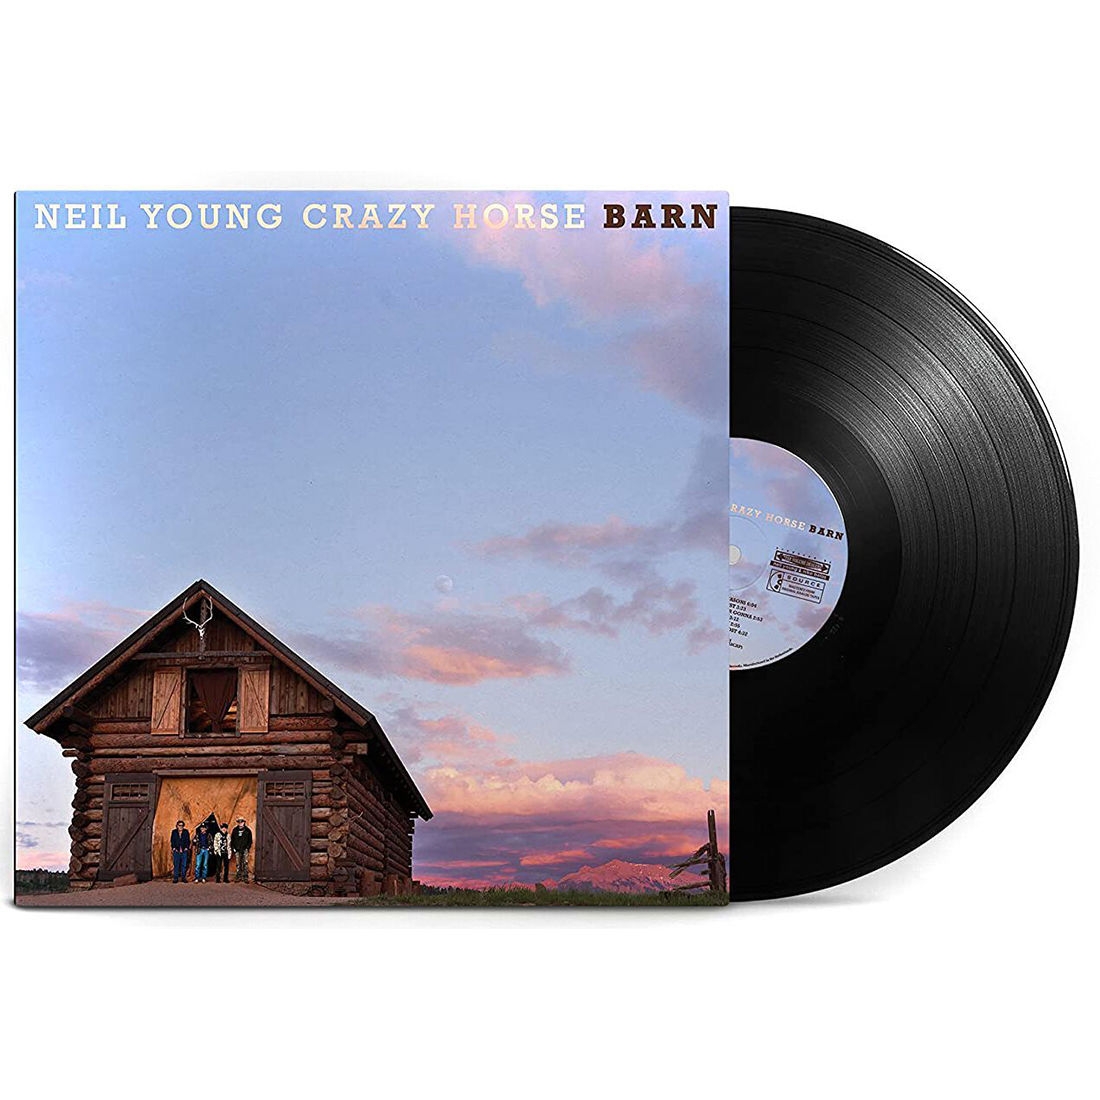 Виниловая Пластинка Young, Neil / Crazy Horse Barn (0093624878445) neil young neil young with crazy horse toast 2 lp